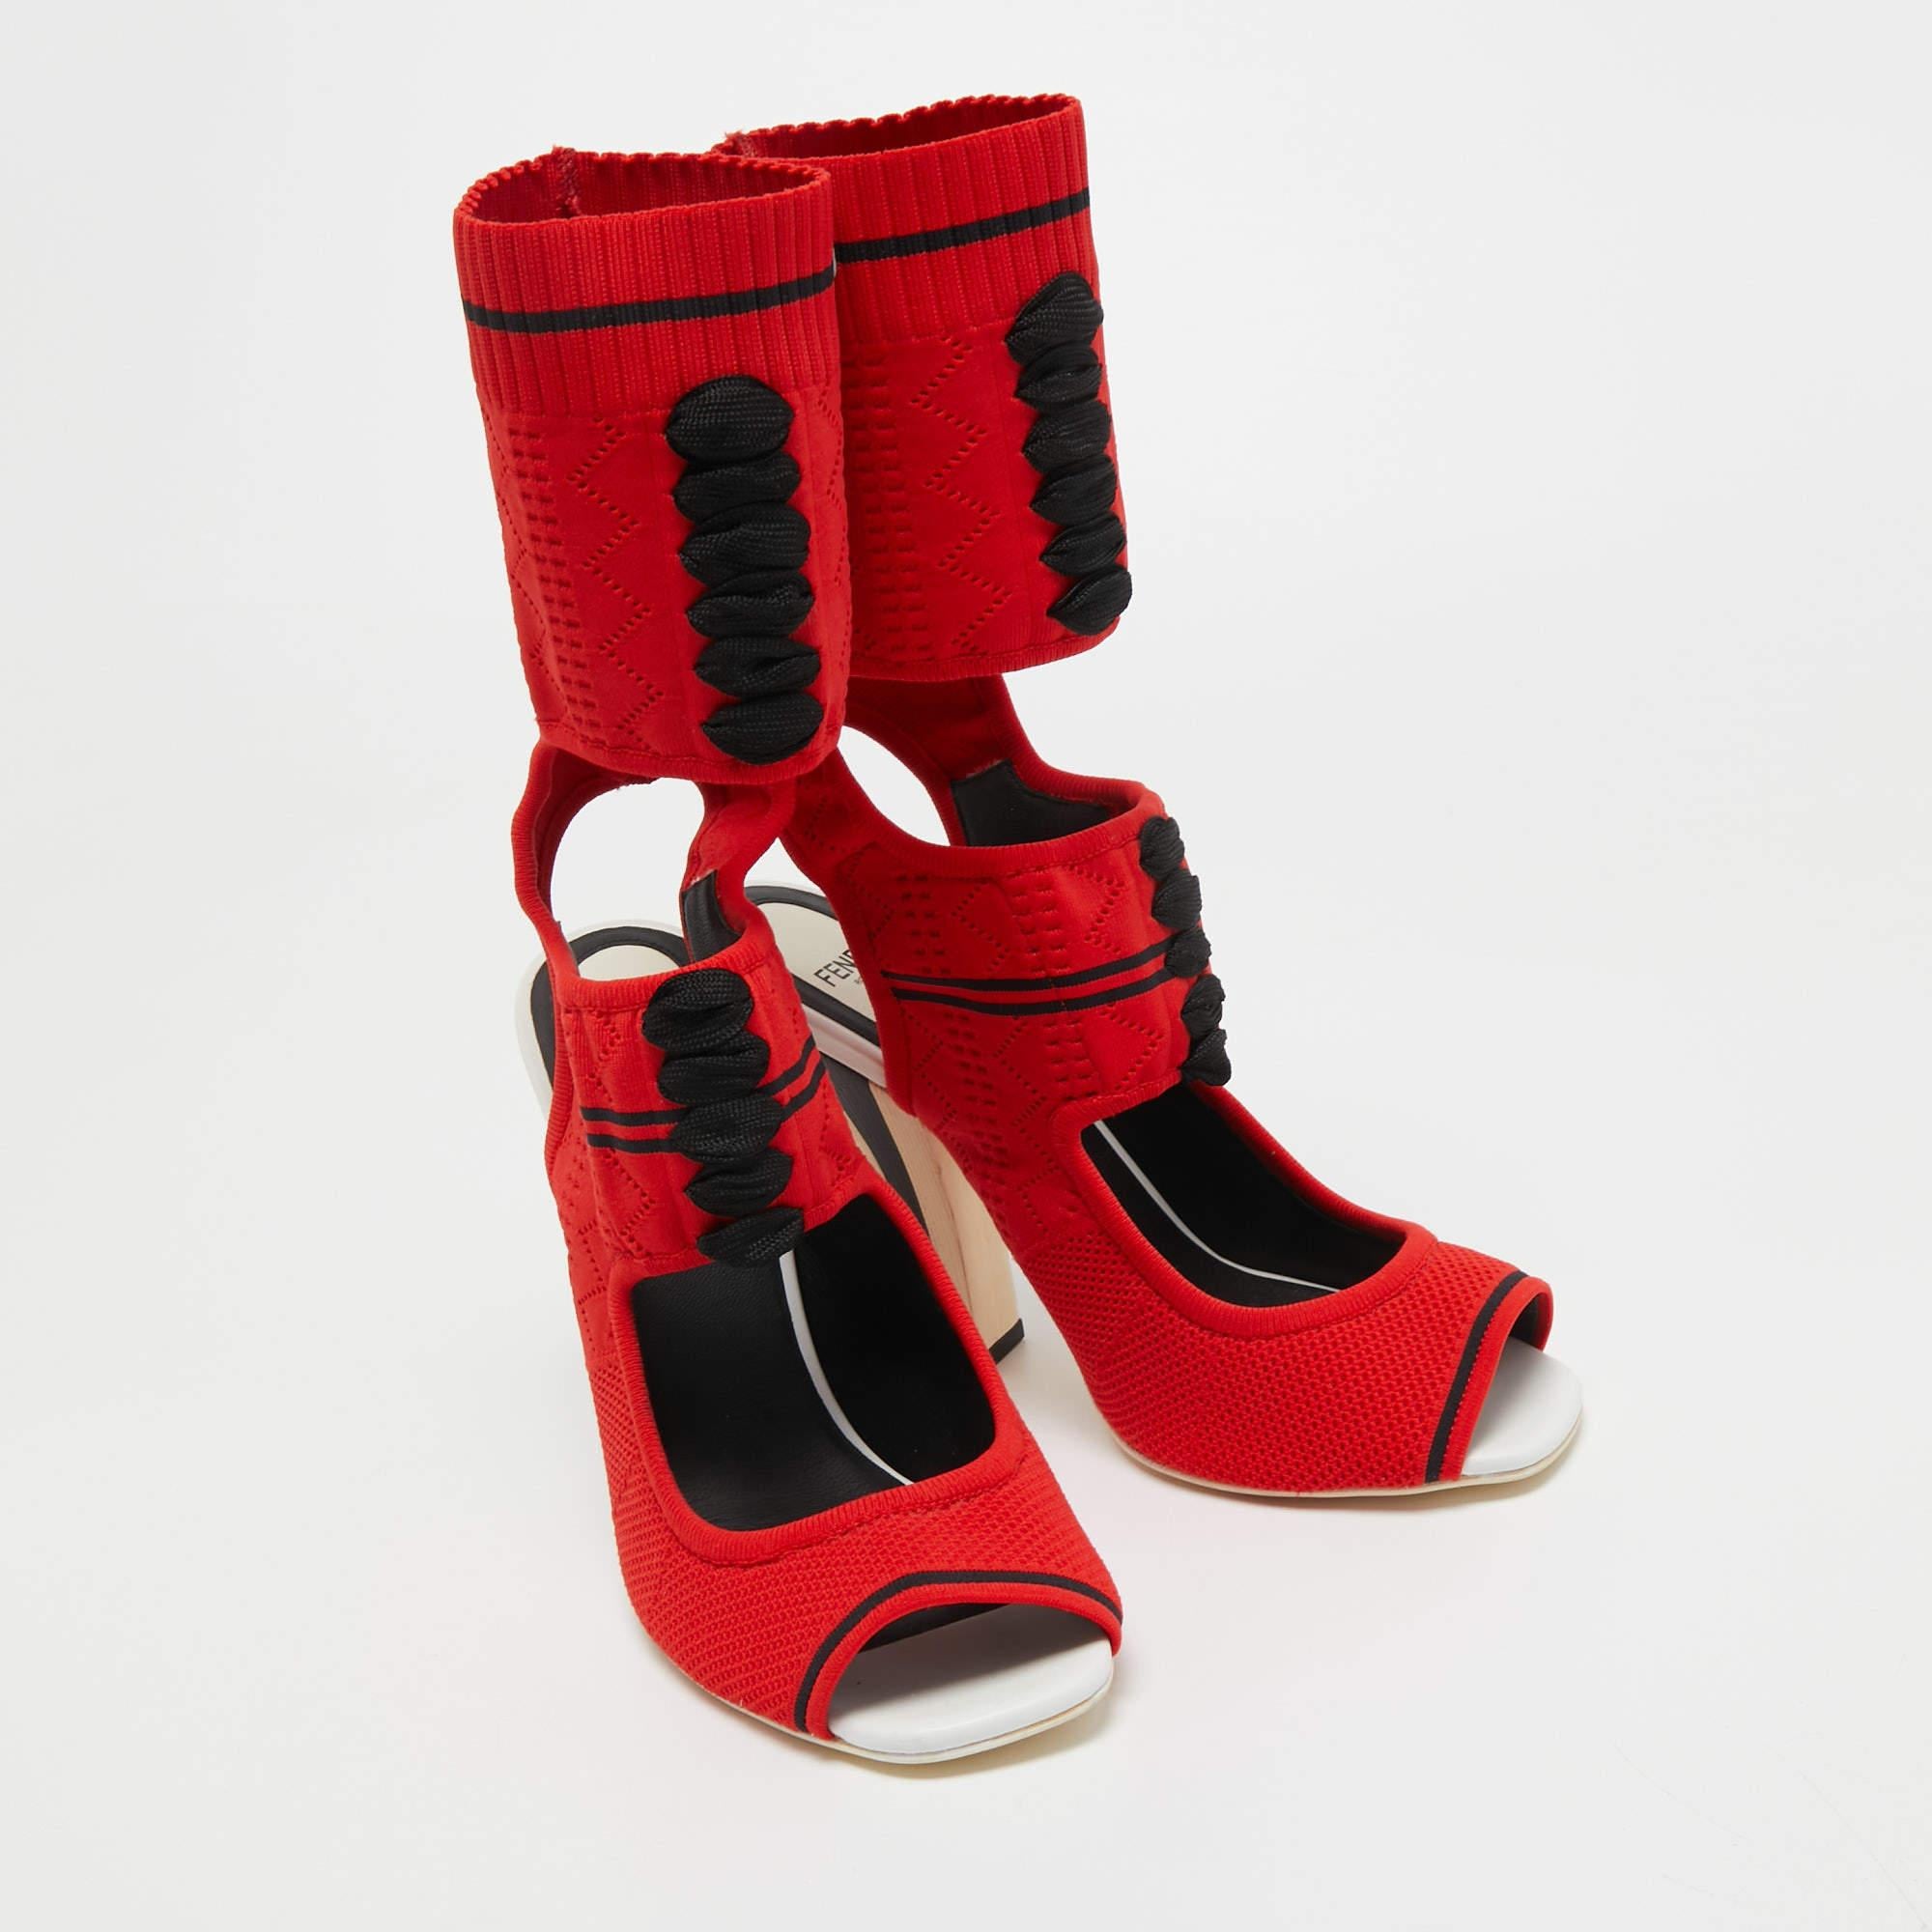 Crafted in Italy, Fendi's sandals are stylish, edgy, and sporty. They are knit fabric in a sock-like silhouette adorned with laces, open toes, and a snug fit. These boots are elevated on striped 11.5 cm heels. Style them with a short dress for a